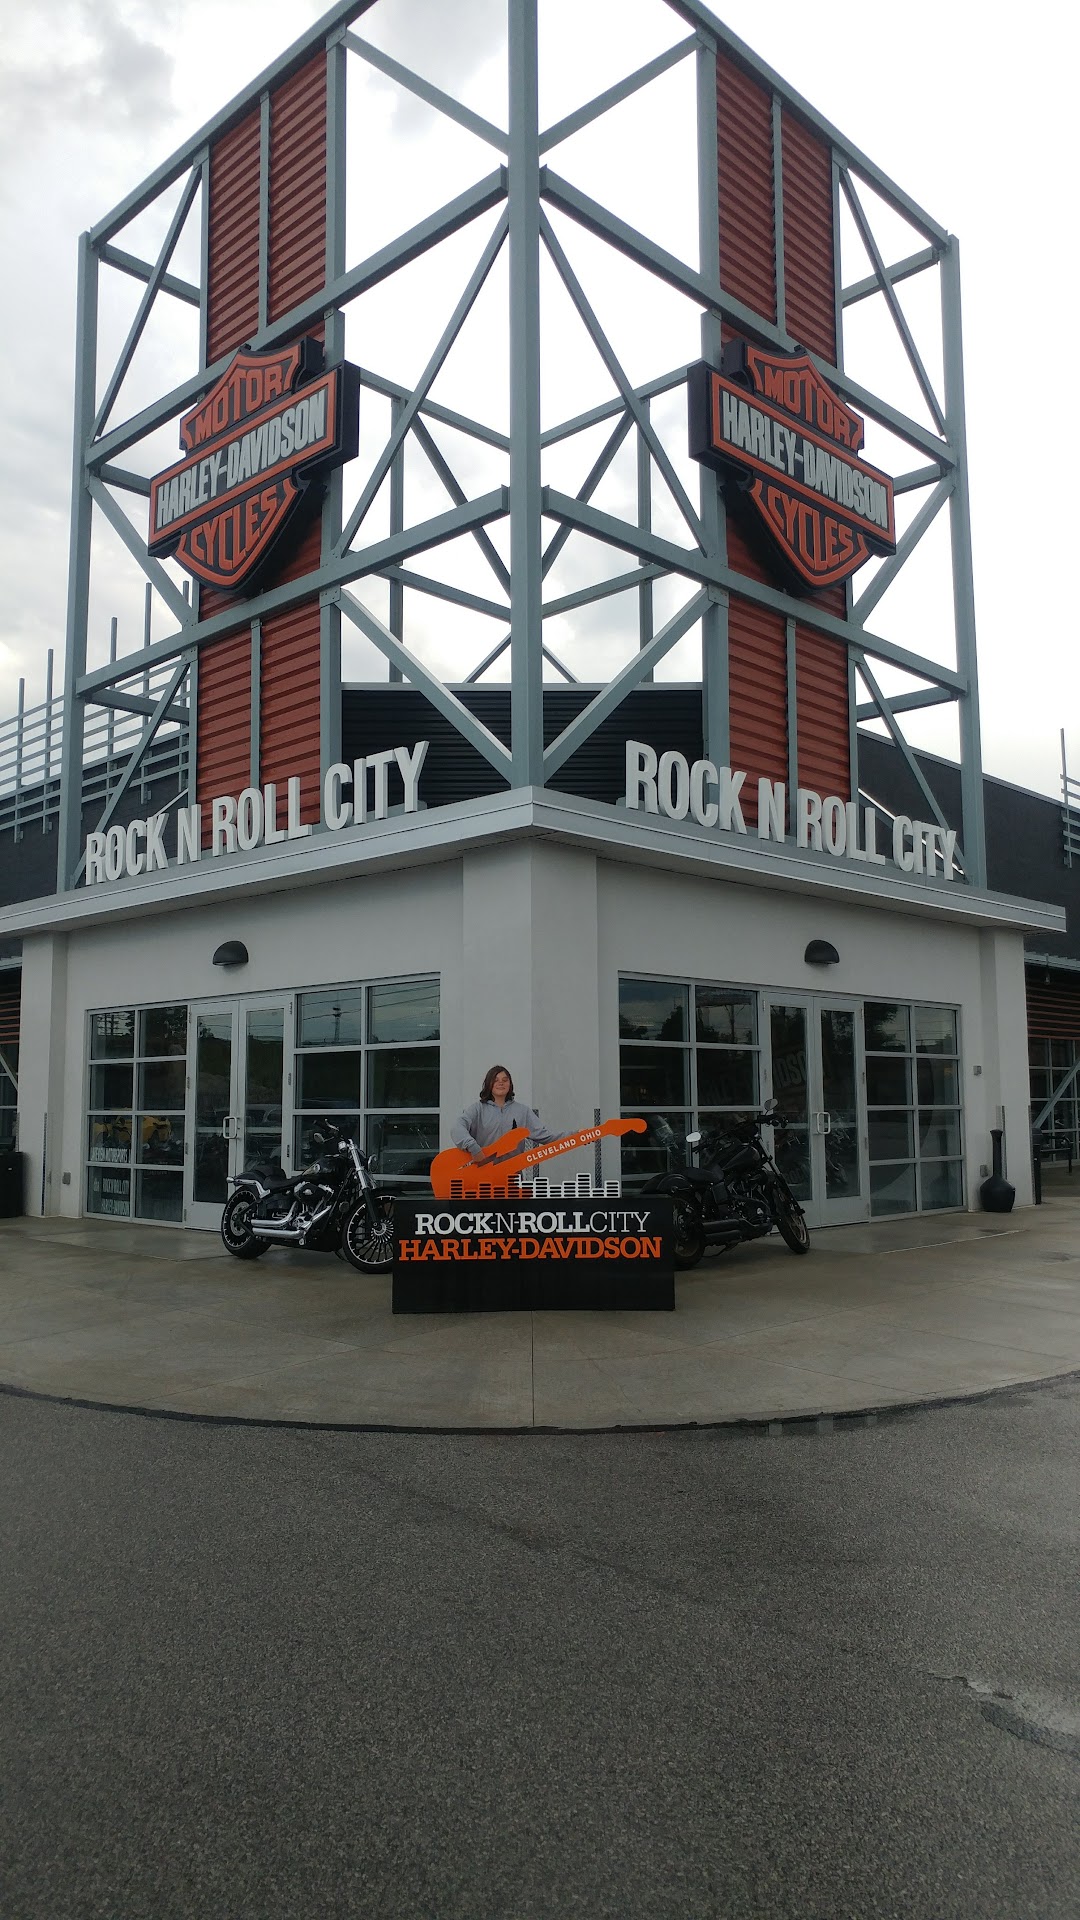 Rock-n-Roll City Harley-Davidson, New & Used Motorcycles, Parts, Service, Riding Gear & Accessories near Cleveland Airport